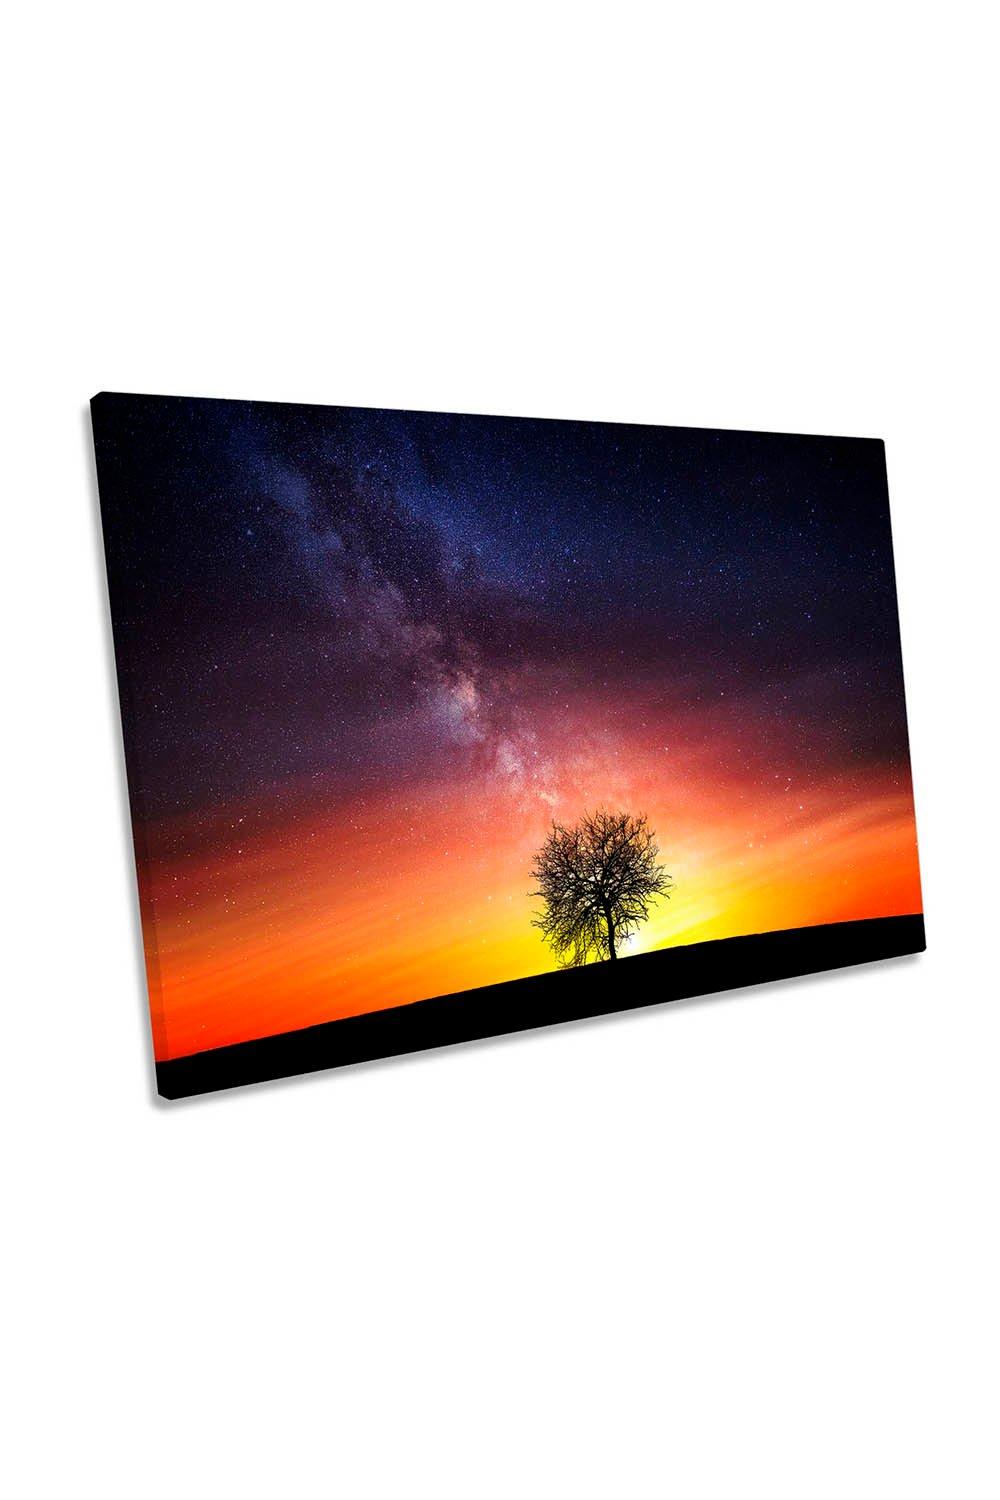 Milky Way Lonely Tree Outer Space Canvas Wall Art Picture Print